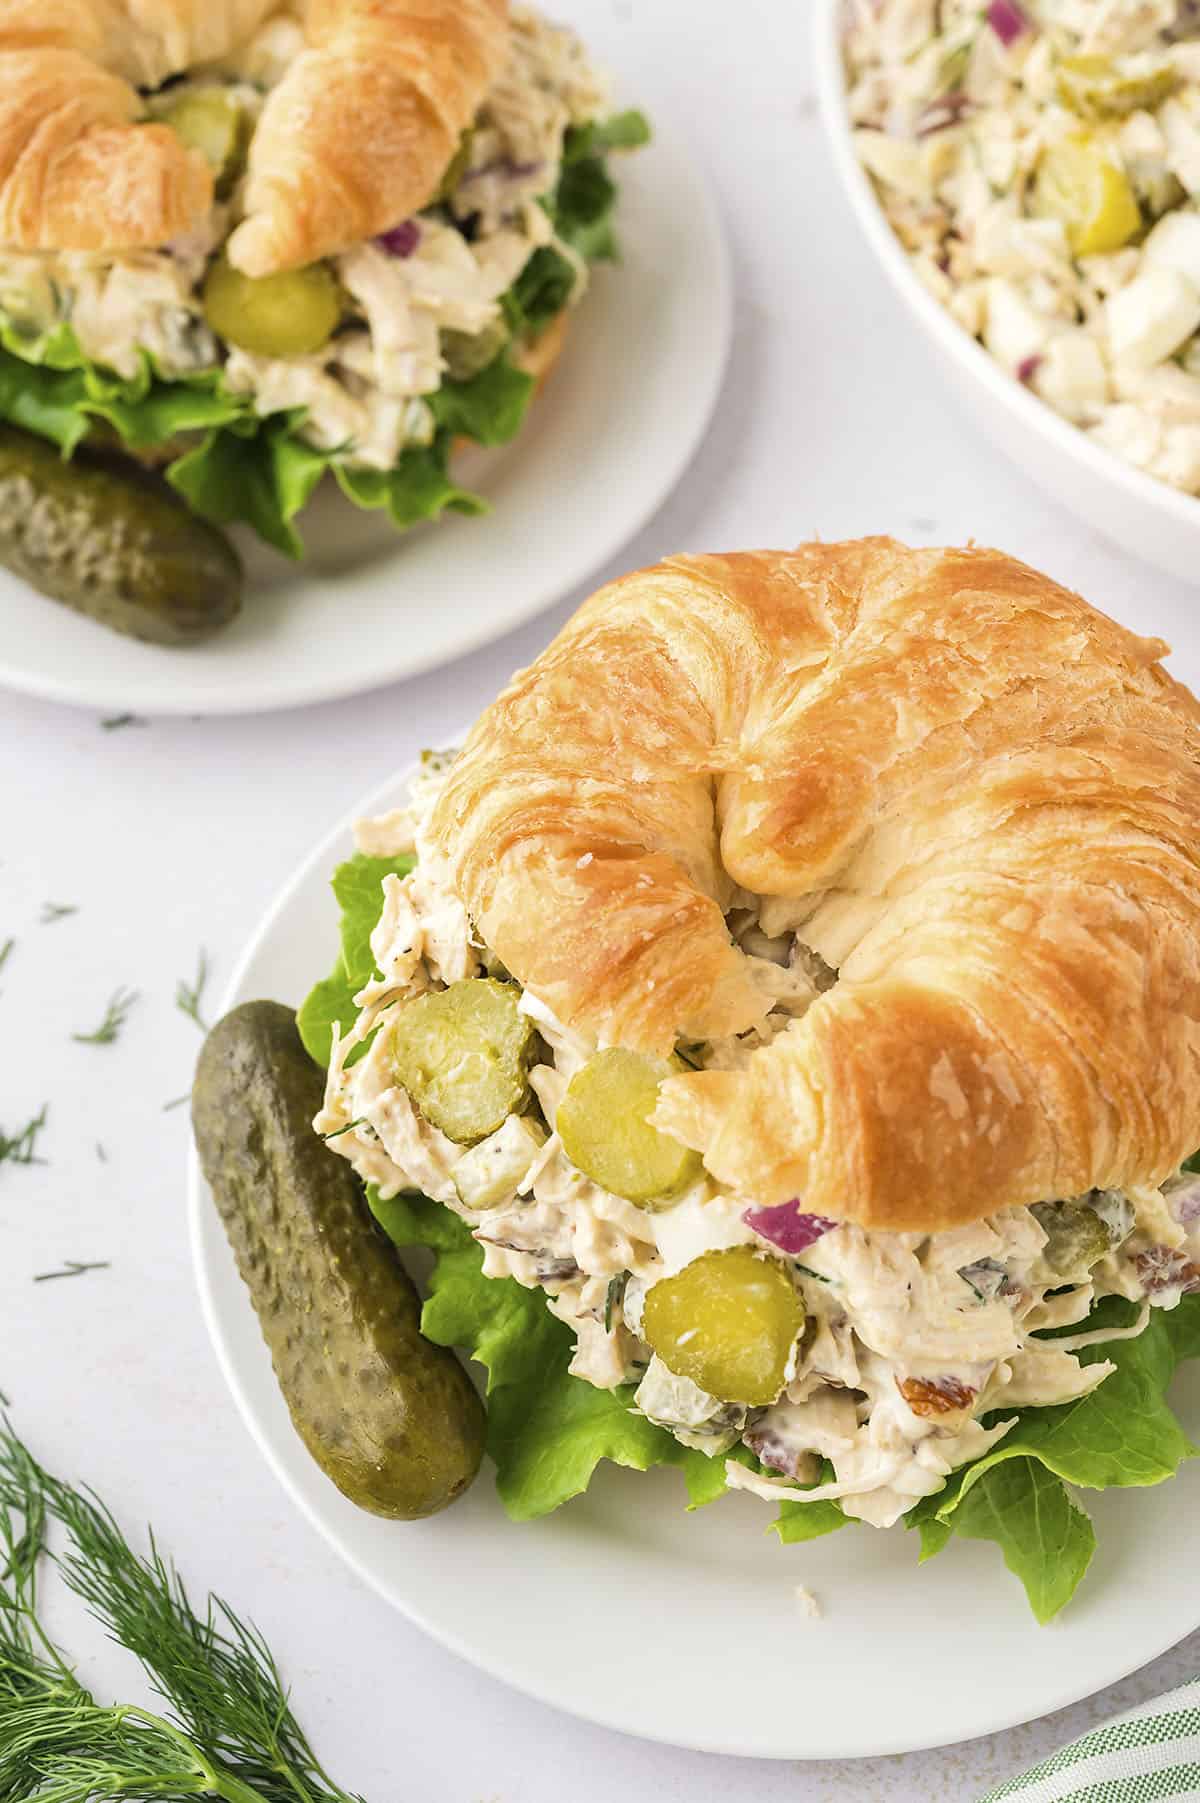 Chicken salad with pickles on croissant on small plate.